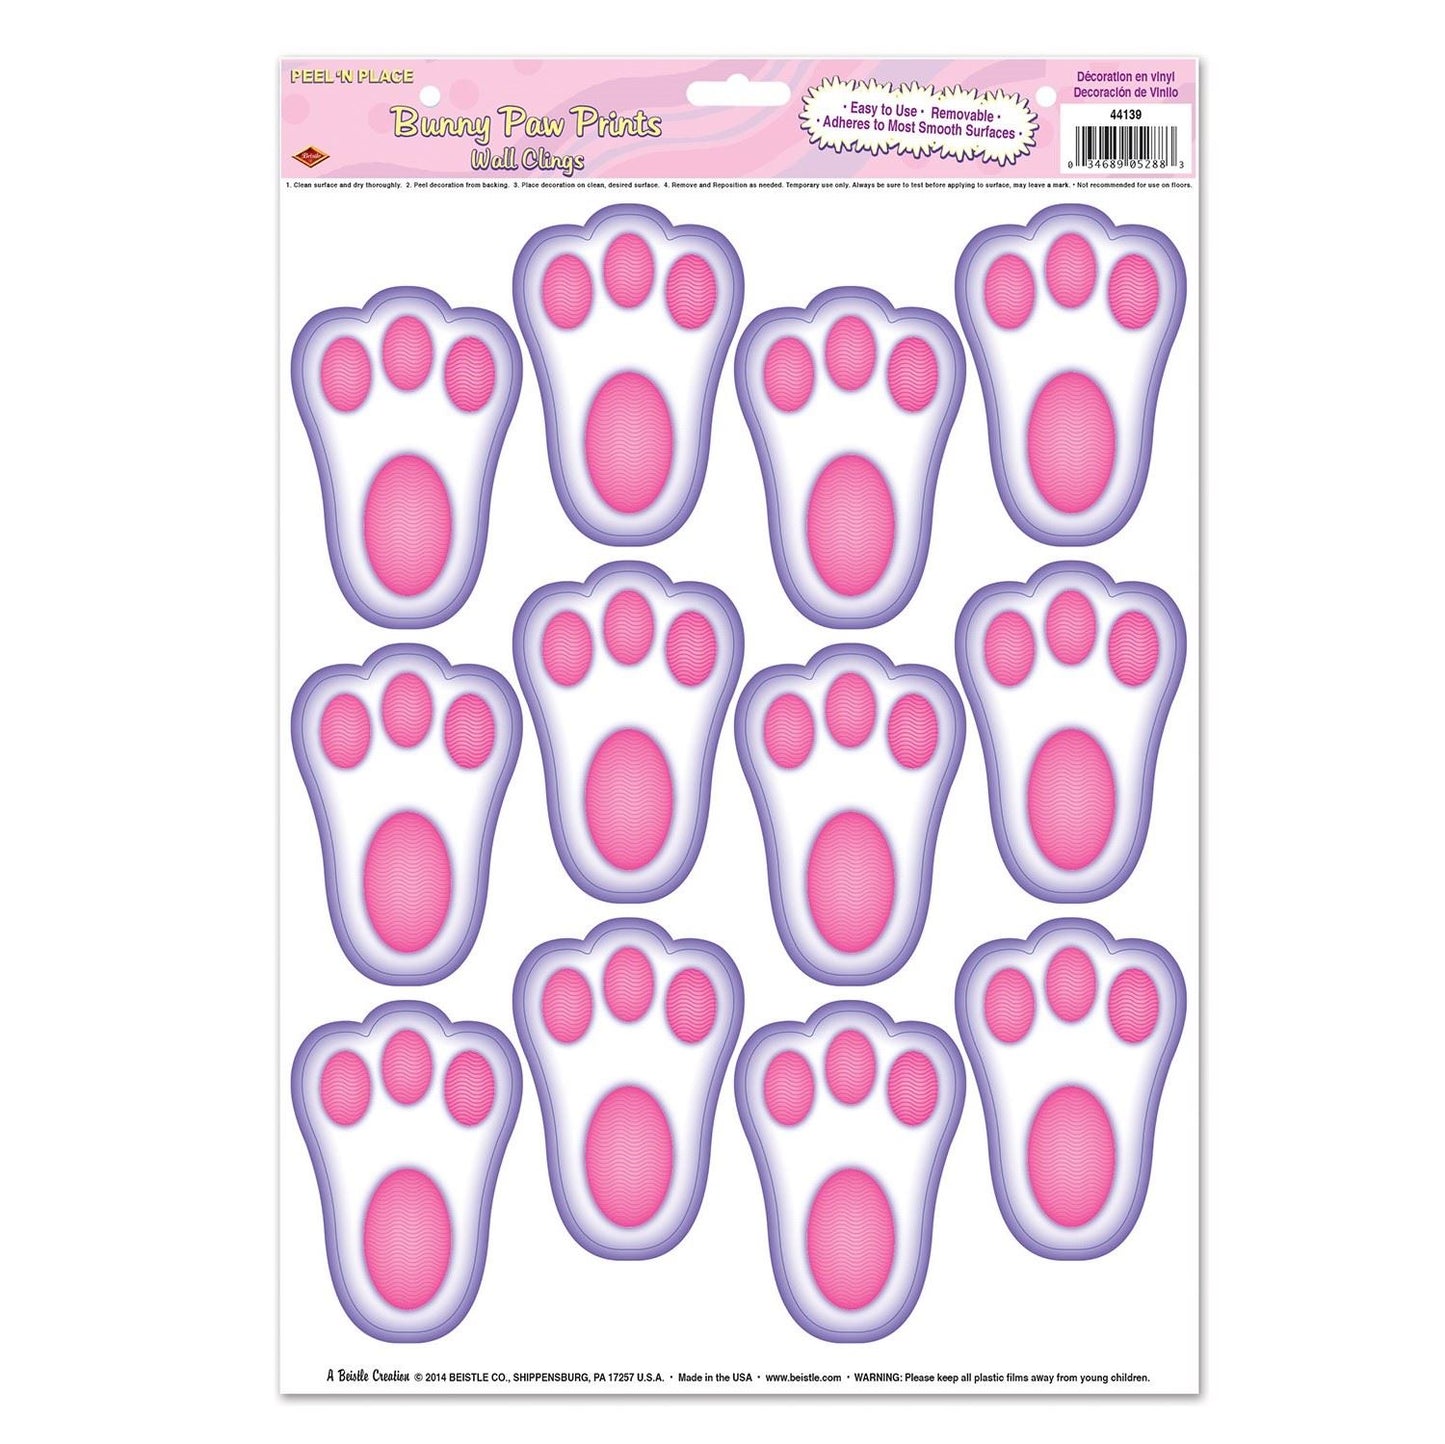 Beistle Bunny Paw Prints Peel 'N Place - Party Supply Decoration for Easter